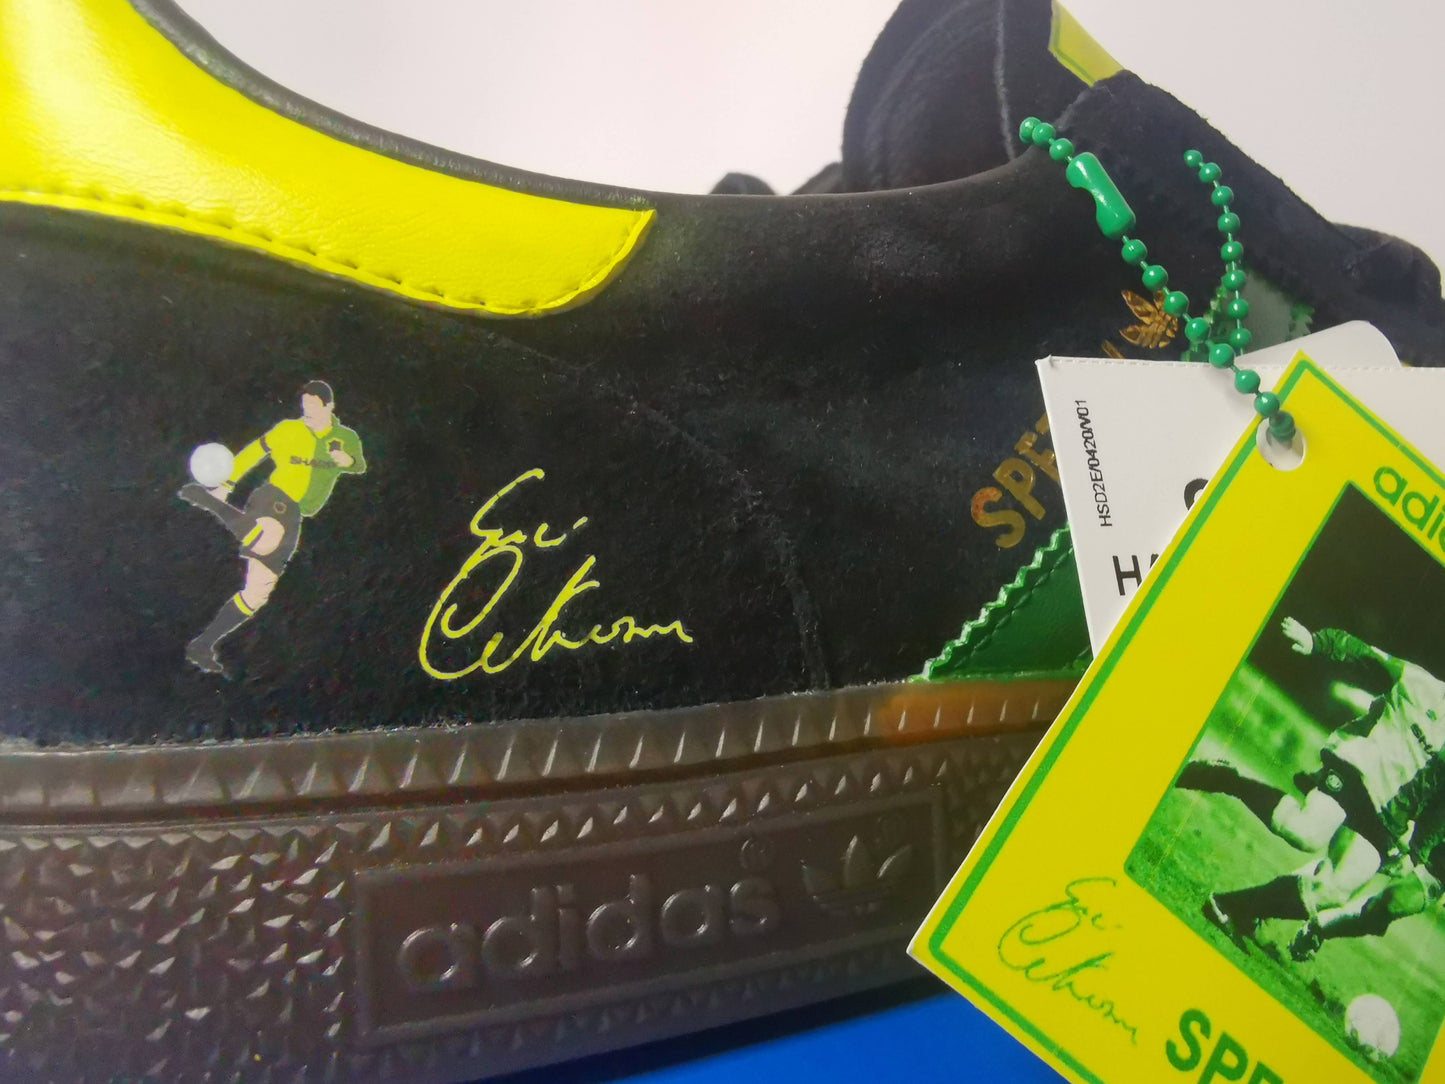 Limited edition Manchester United Eric Cantona inspired Black /Green/ Yellow Adidas custom Handball Spezial trainers  / sneakers